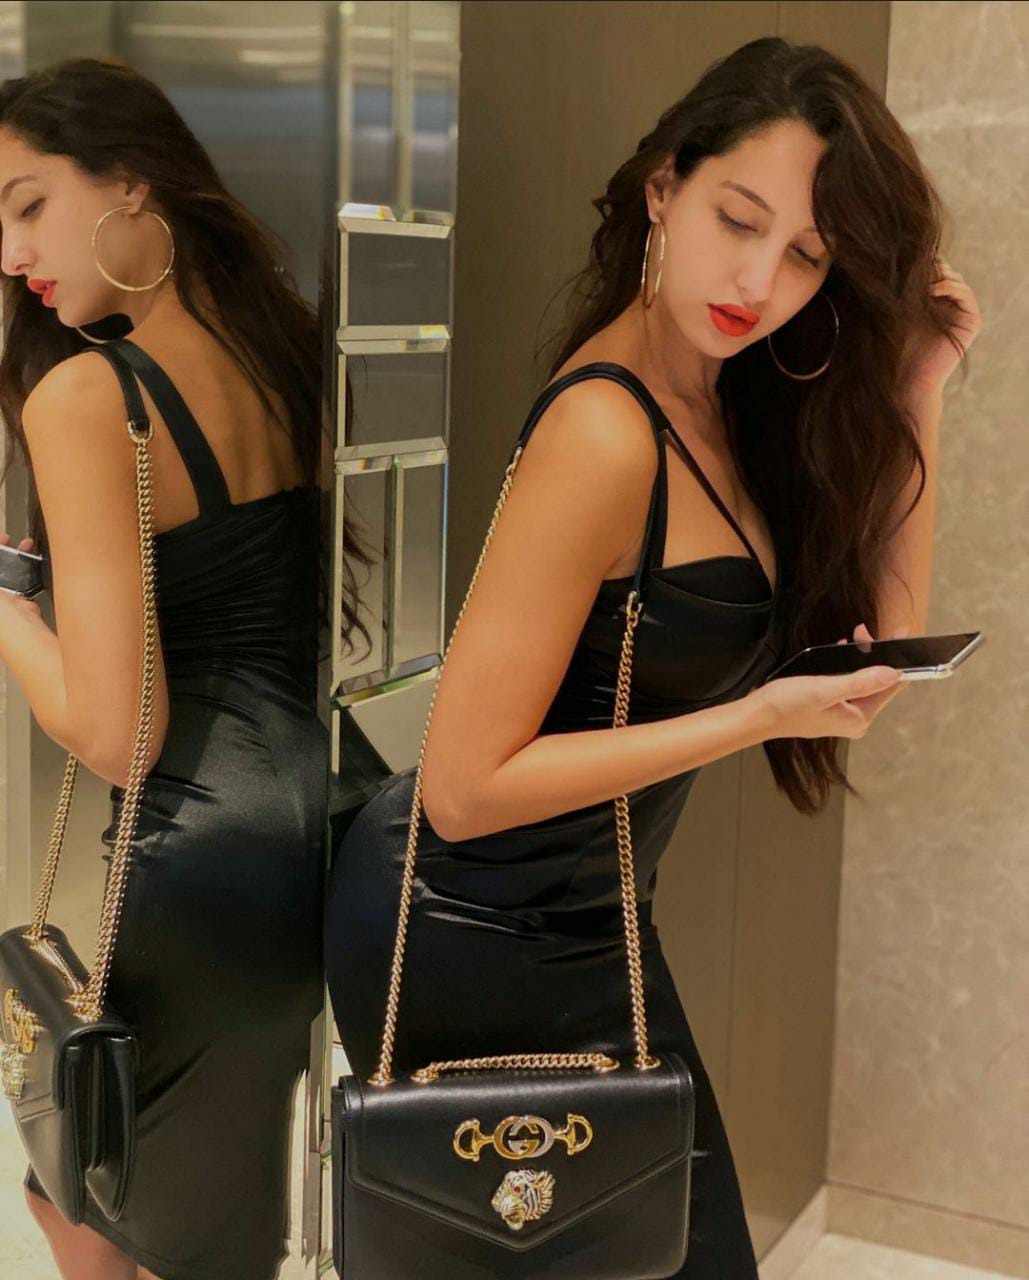 Nora Fatehi's Bodycon Dresses Are A Hit When Her Rs 3.2 Louis Vuitton Lakh  Handbag Adds Pizzazz To The Look